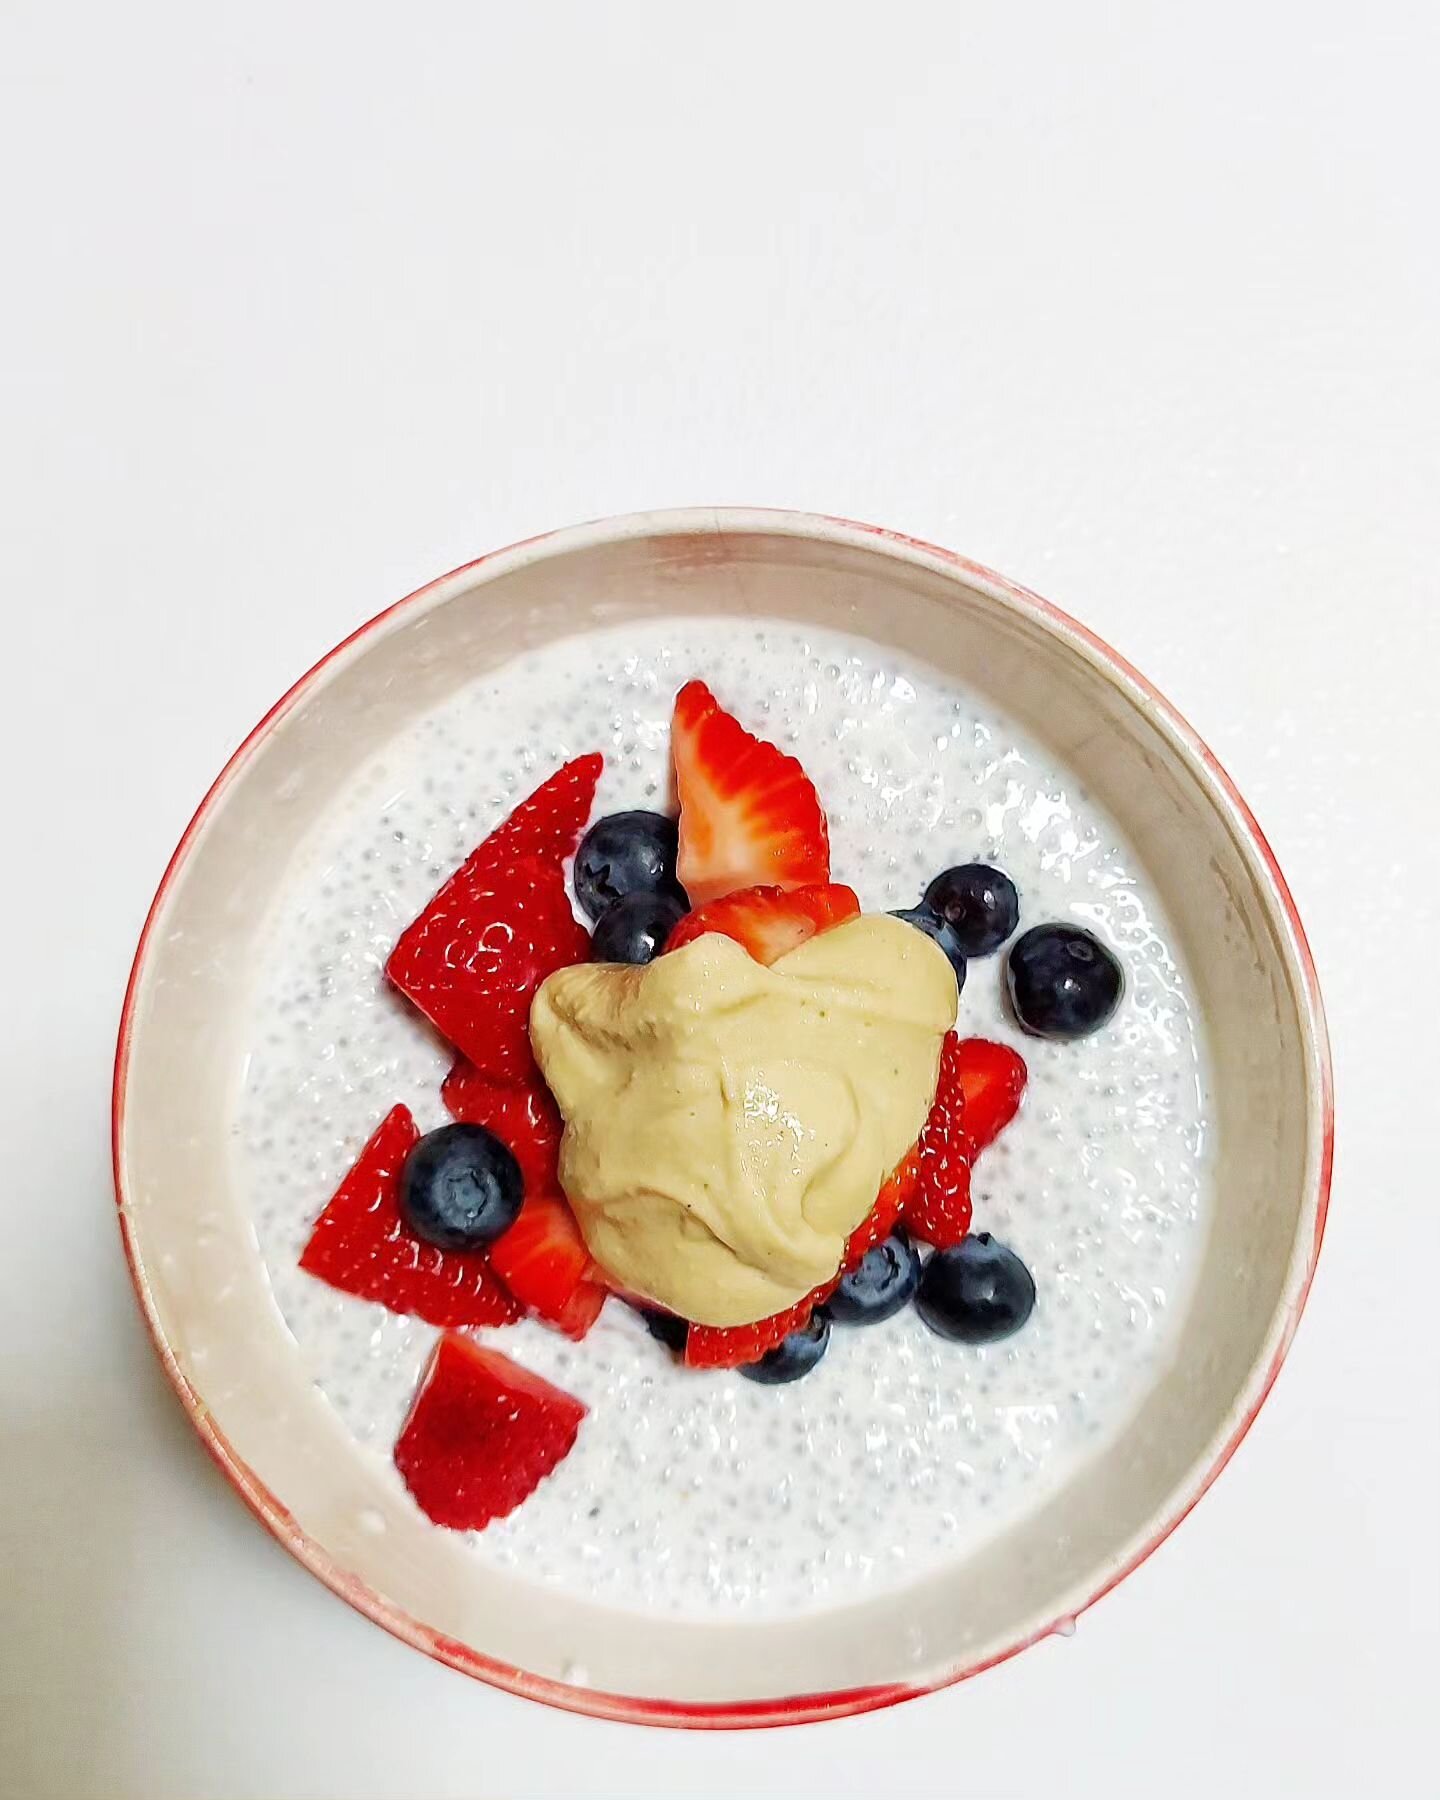 Is breakfast the most important meal of the day?

Absolutely.  And here's why.

What you eat for your first meal of the day can set you up to:

- feel supported, nourished and balanced and making good choices the rest of the day

Or

- on a rollercoa